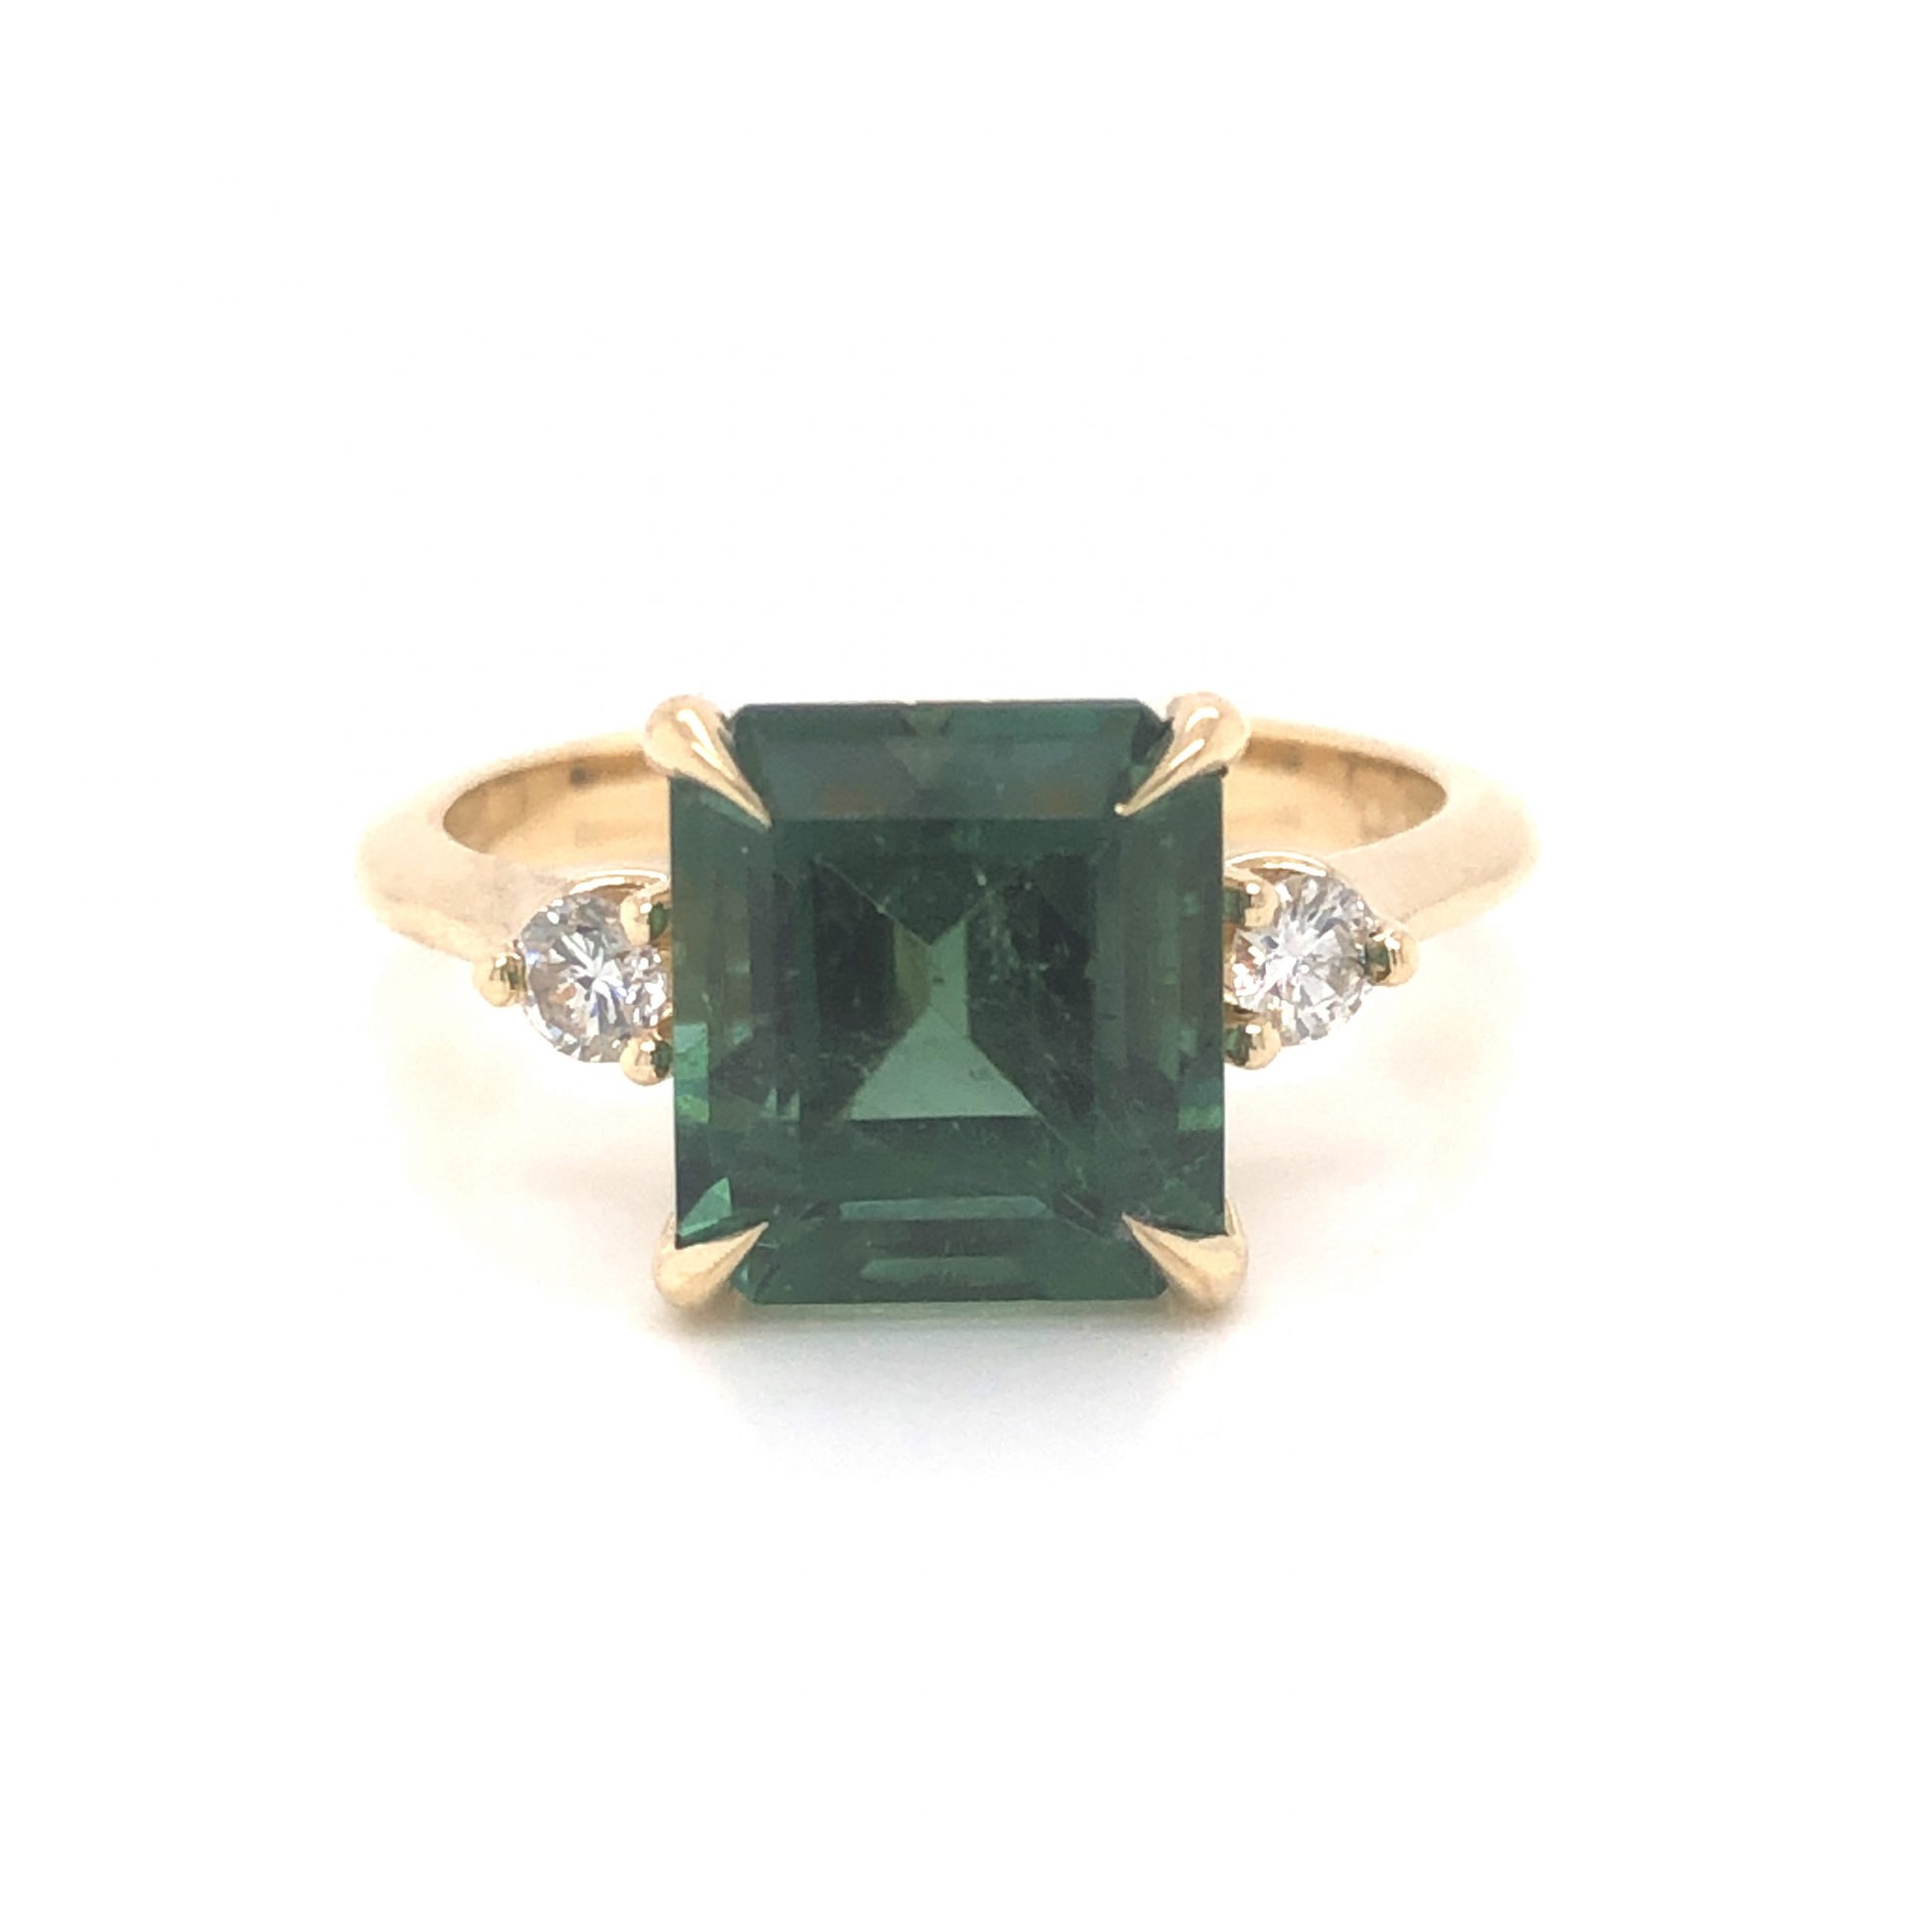 3.66 Square Emerald Cut Tourmaline & Diamond Ring in 14k Yellow GoldComposition: PlatinumRing Size: 6.75Total Diamond Weight: .14 ctTotal Gram Weight: 4.25 gInscription: 14k